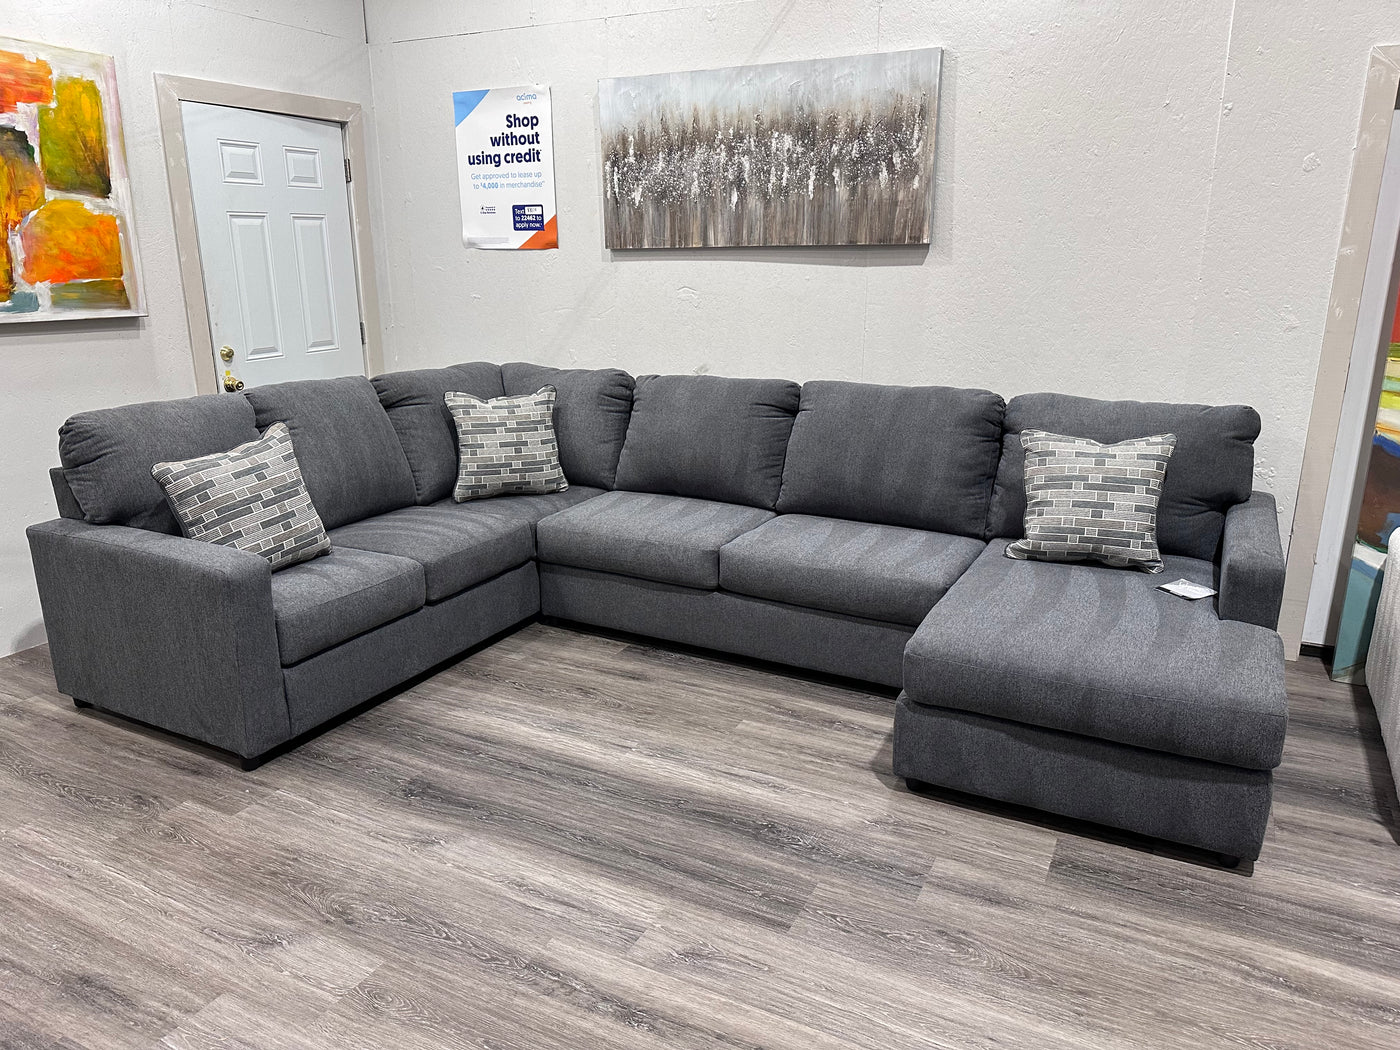 Brand new three-piece Gray Sectional section